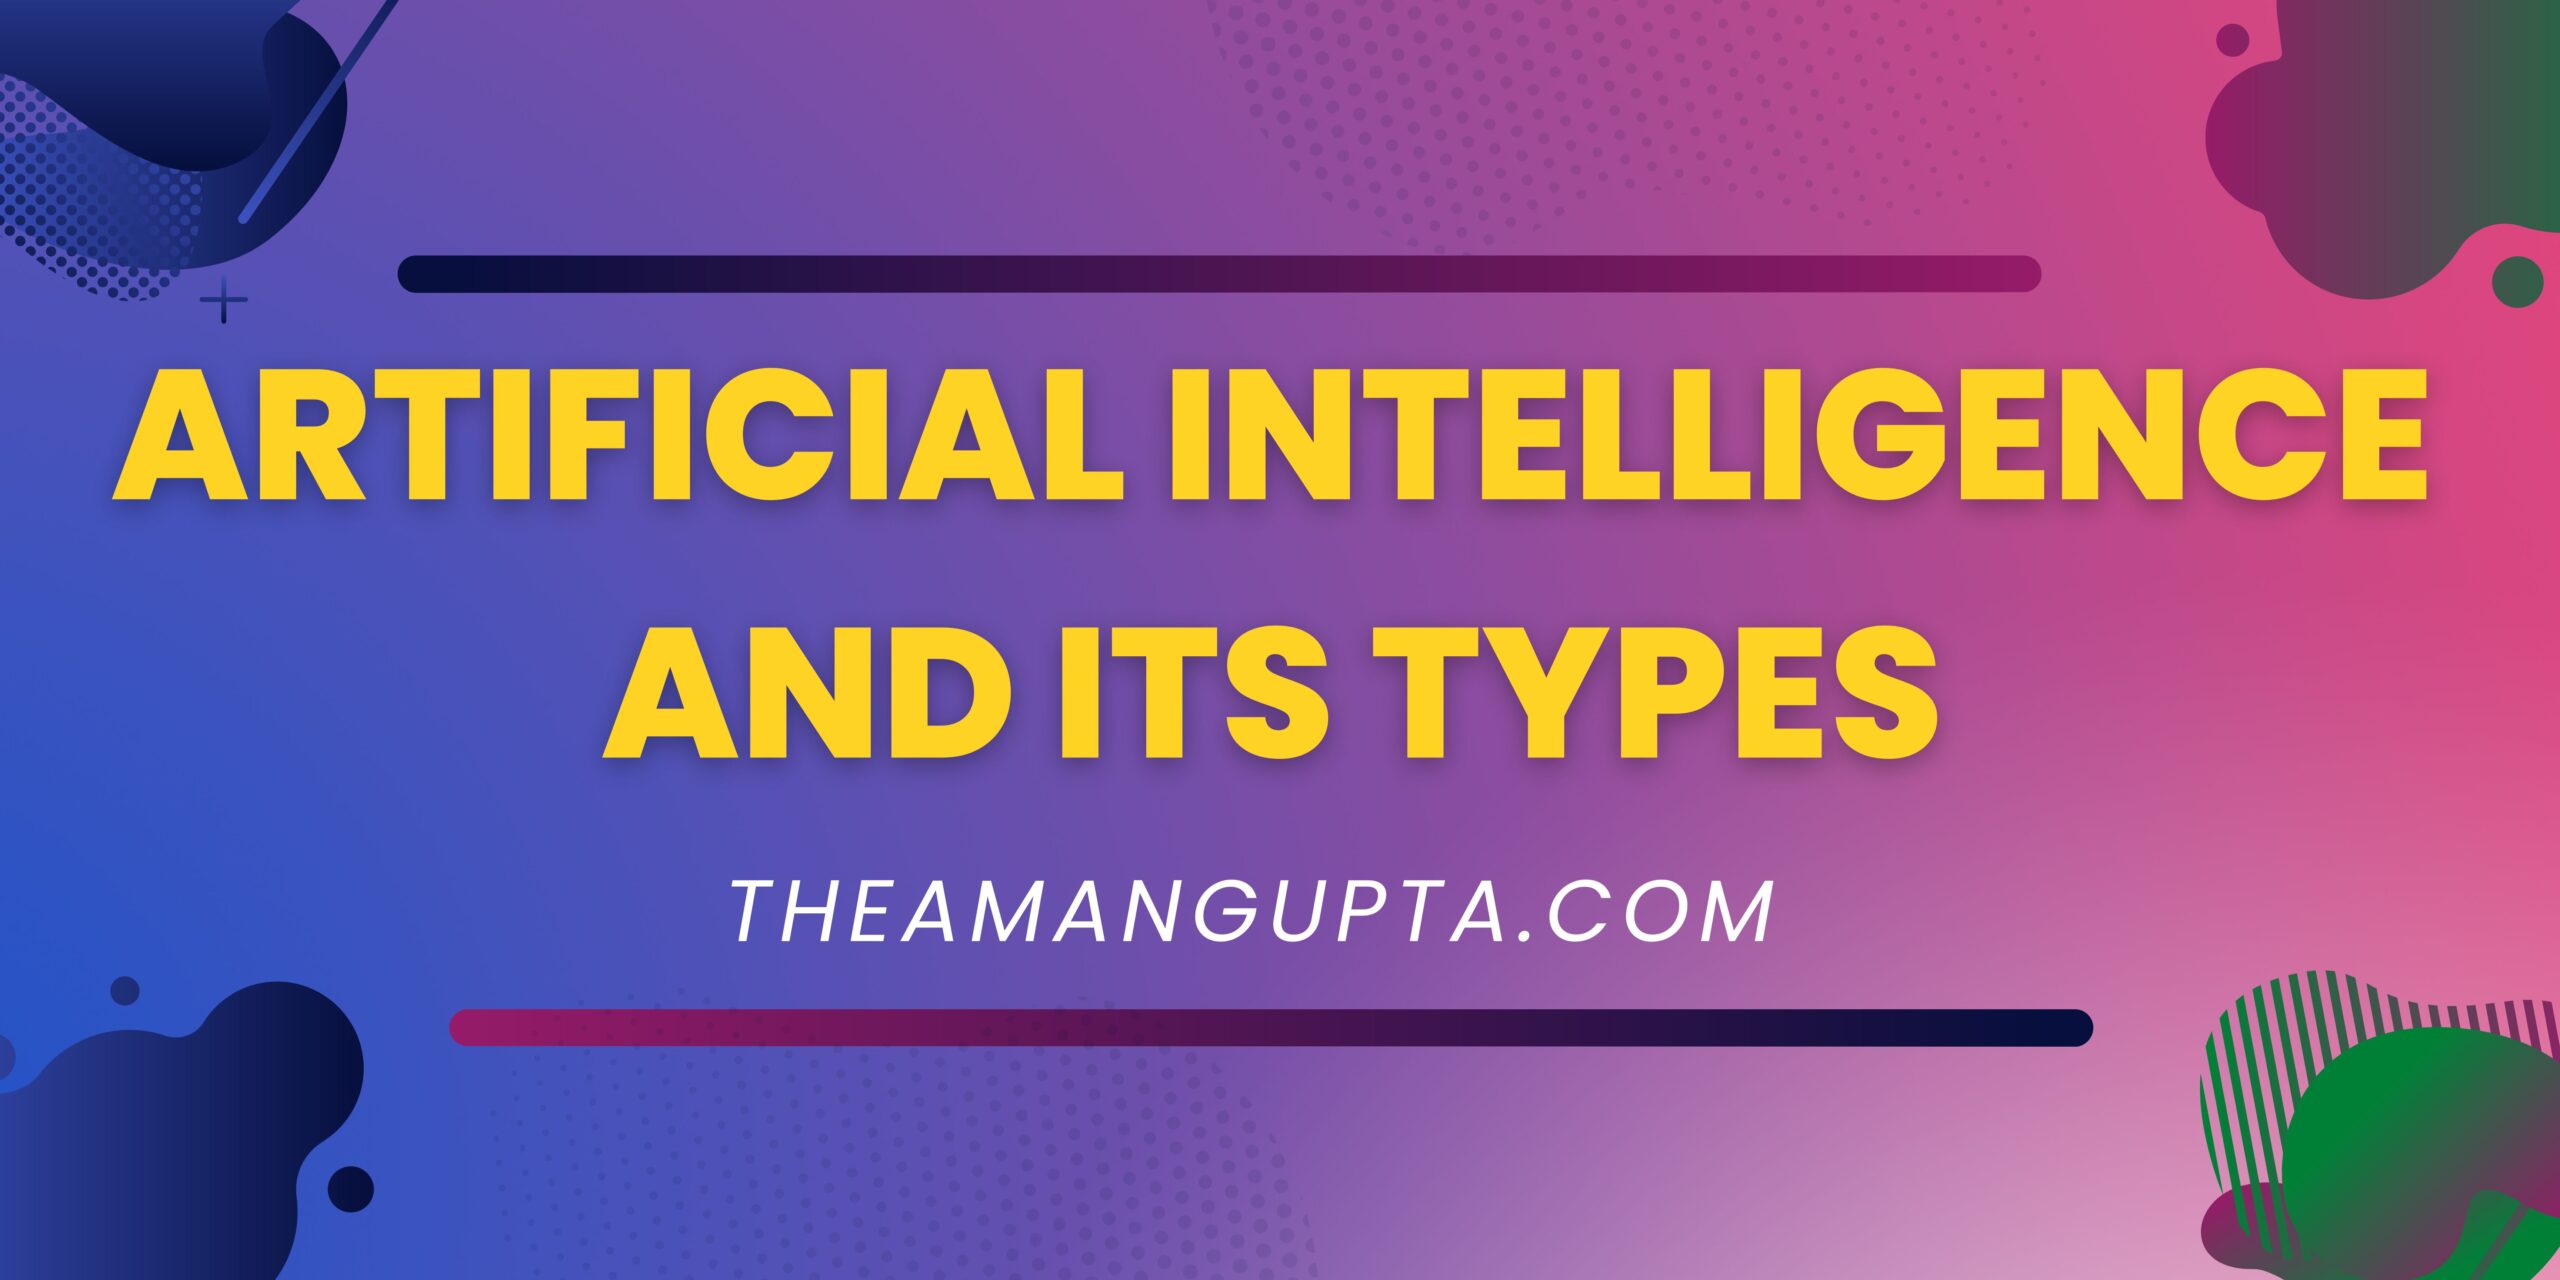 Artificial Intelligence And Its Types|Artificial Intelligence|Tannu Rani|Theamangupta